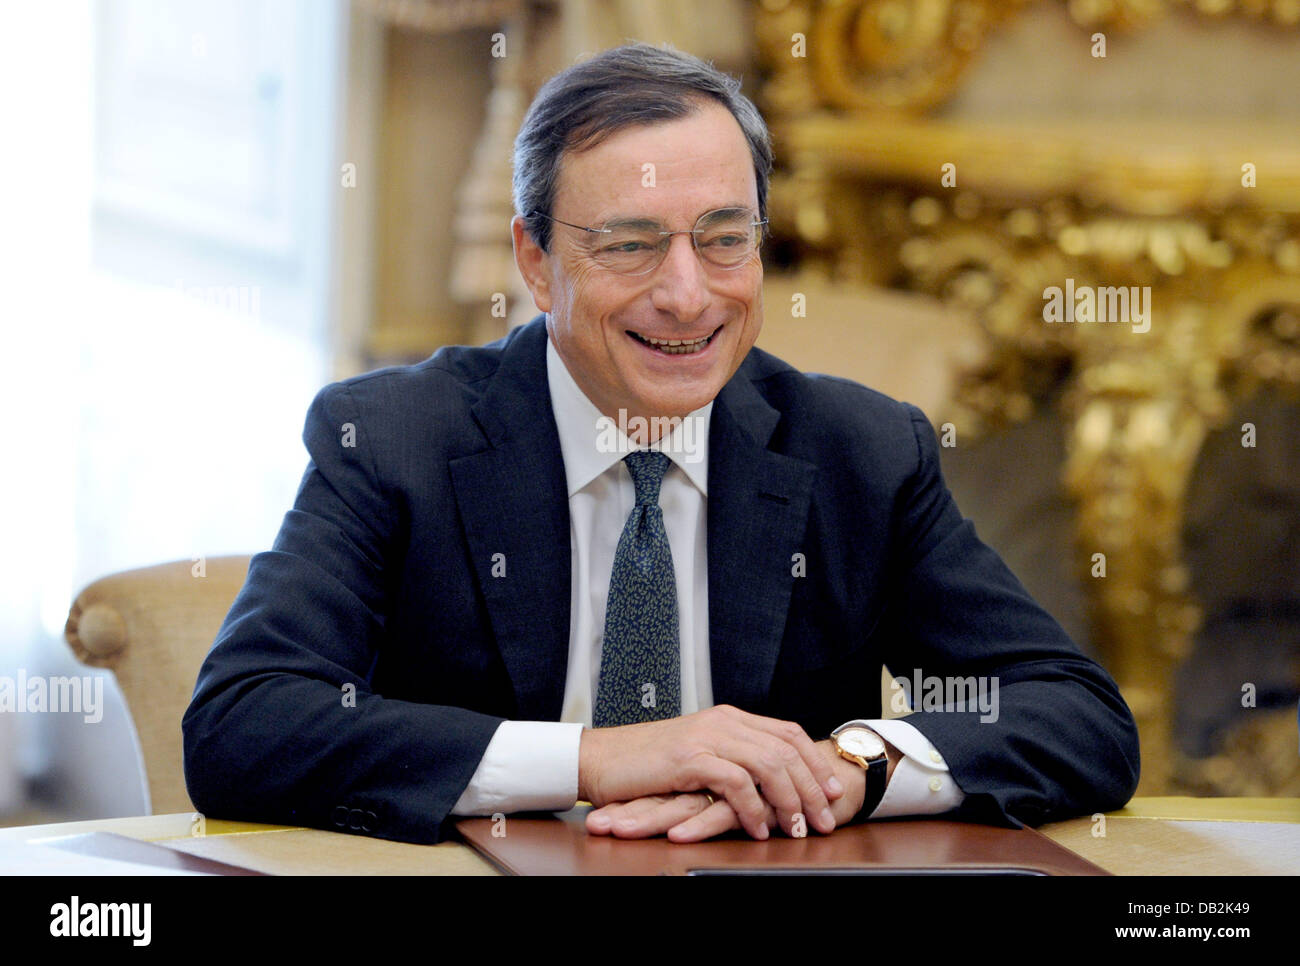 The Italian Central Bank governor and designated President of the European Central Bank, Mario Draghi, is pictured in Rome, Italy, 14 September 2011. Photo: Rainer Jensen Stock Photo